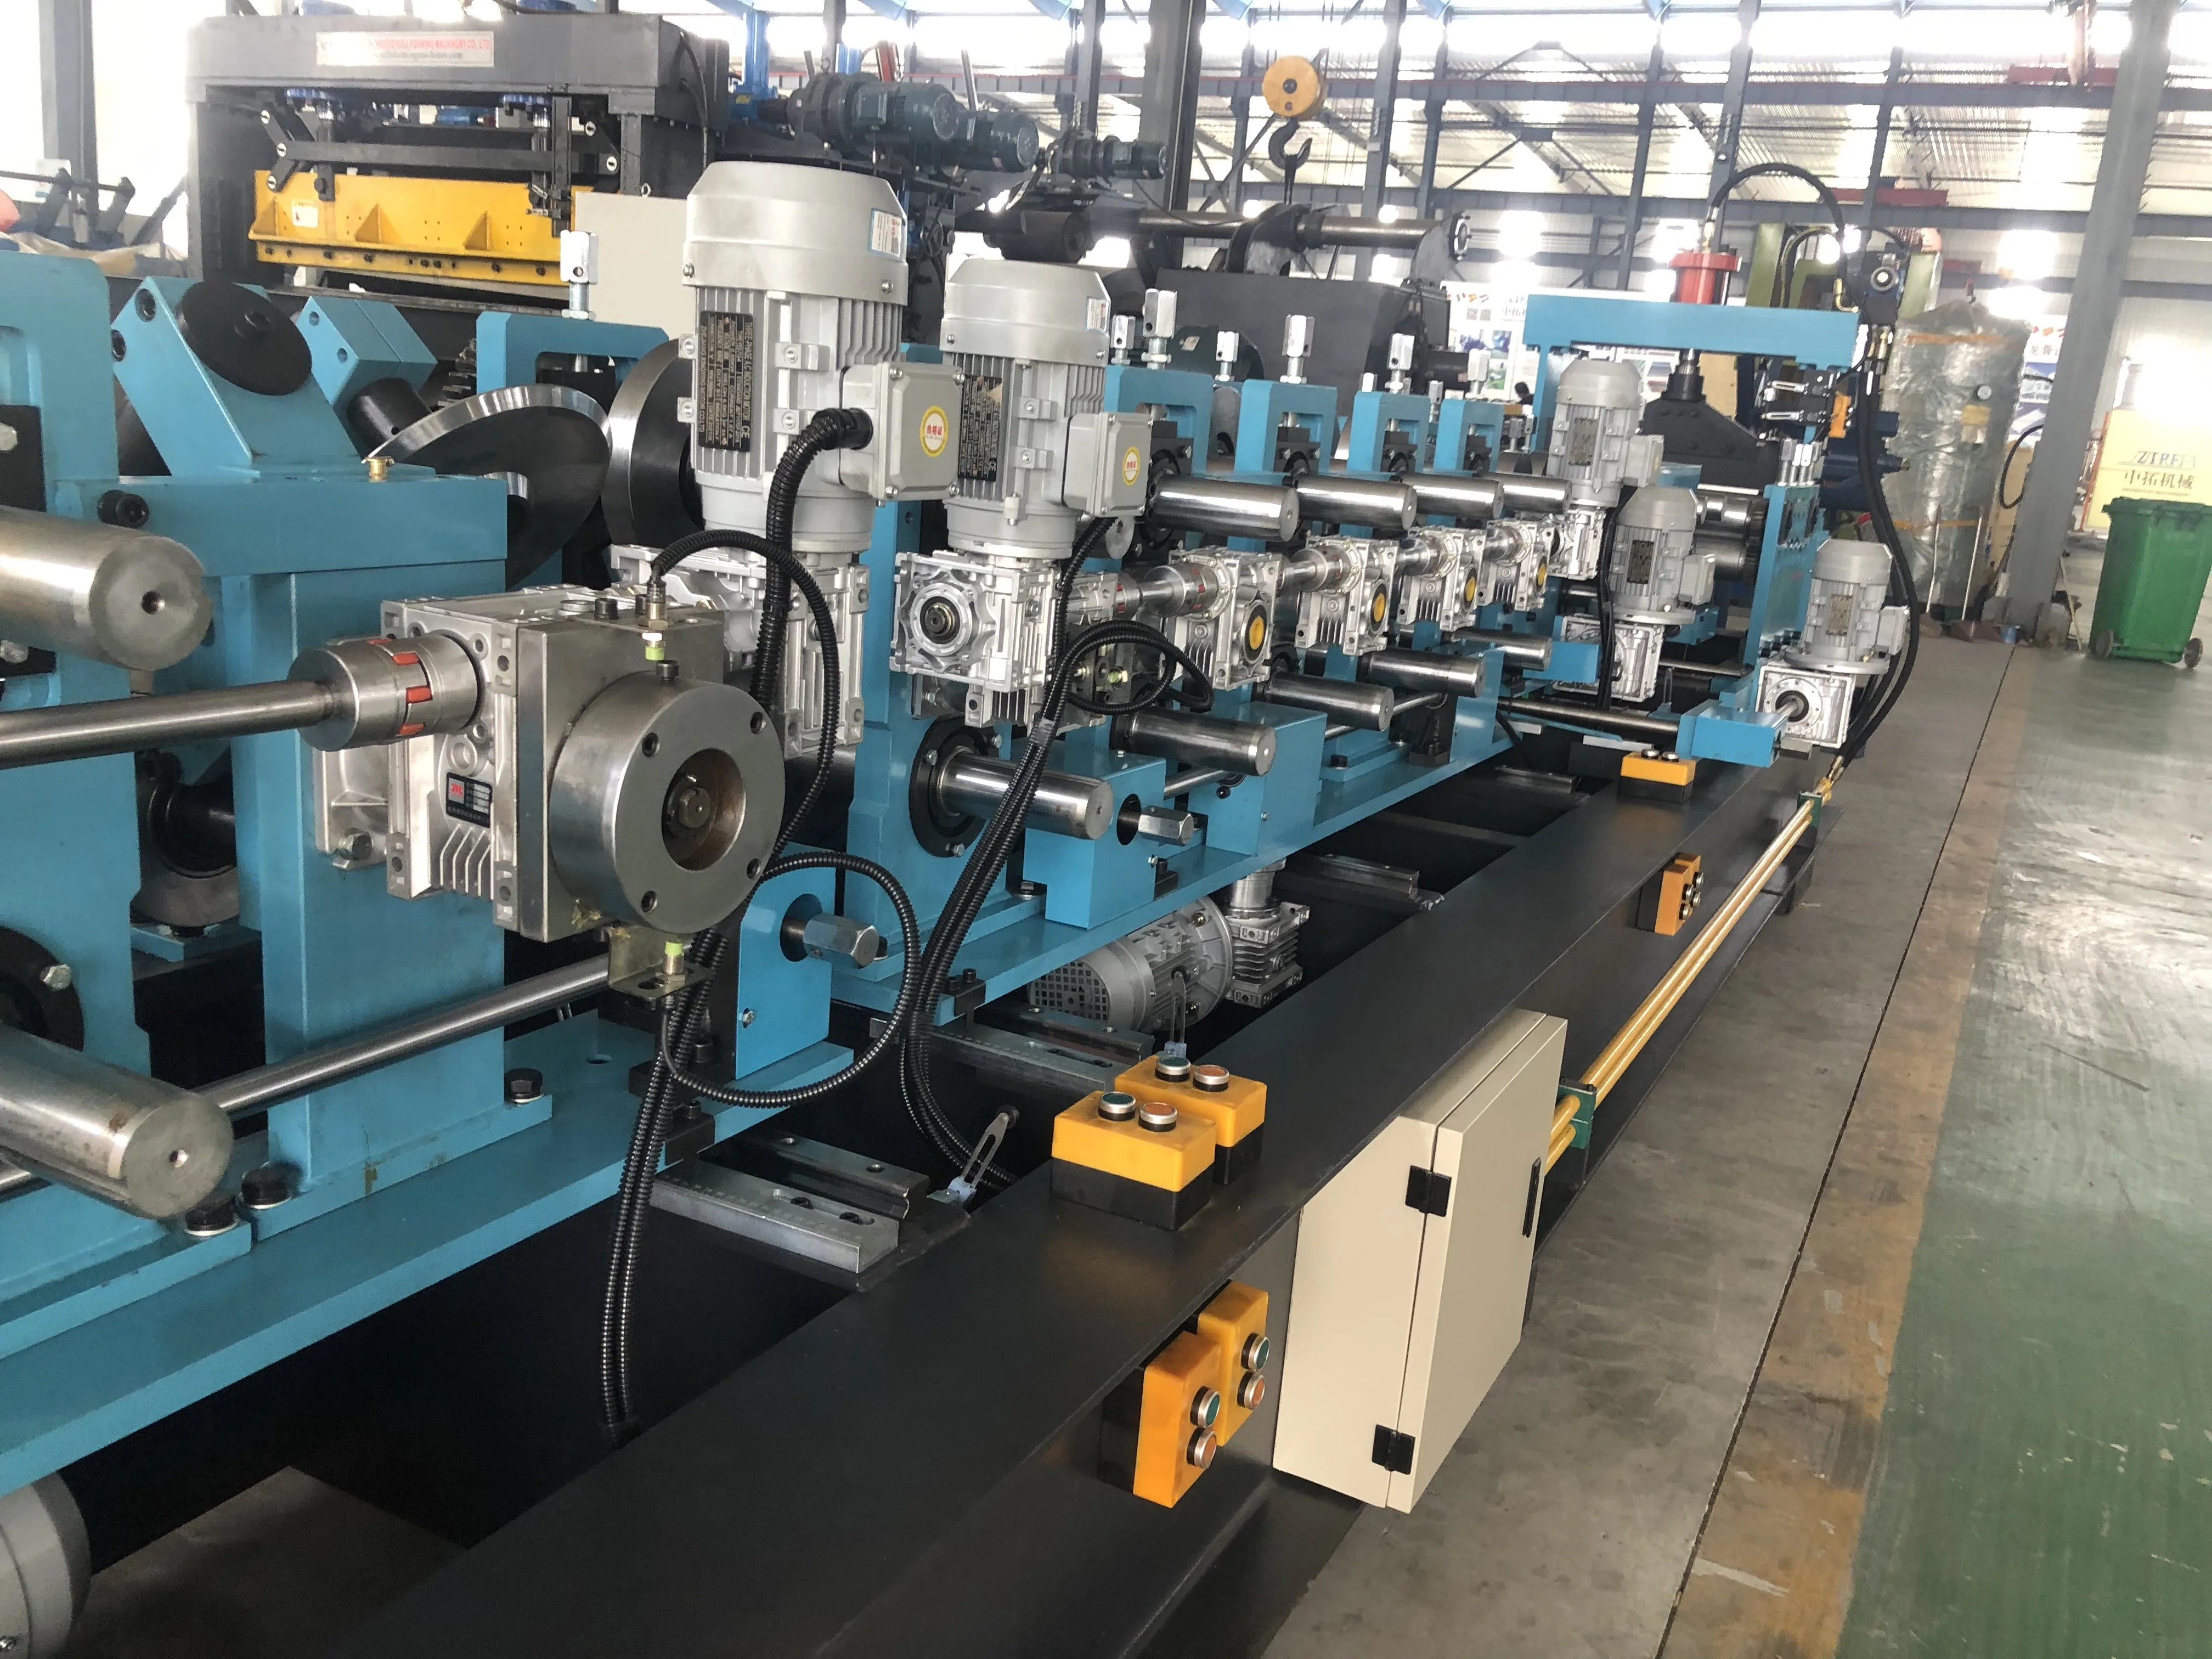 High speed automatic operate CZ interchangeable purlin production machine